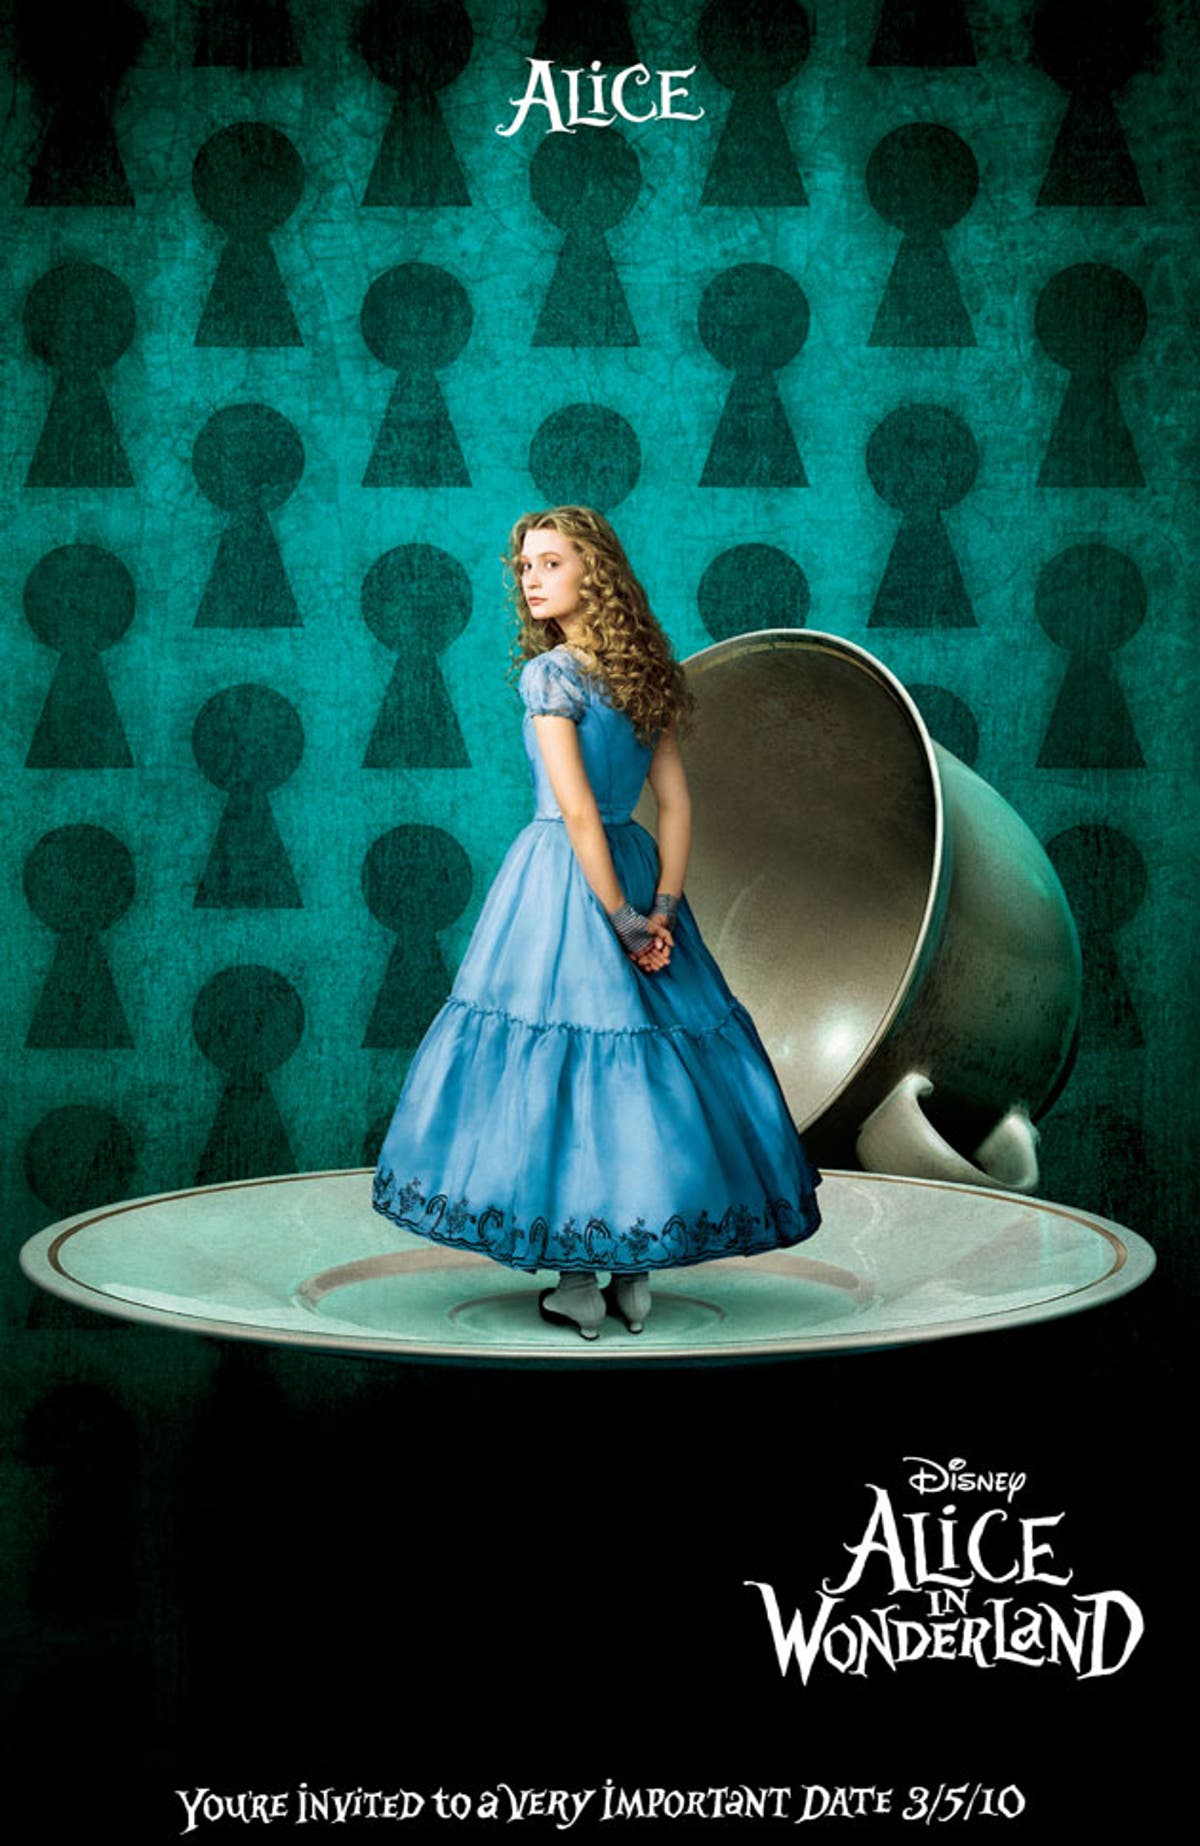 Making magic with Alice in Wonderland, The Independent